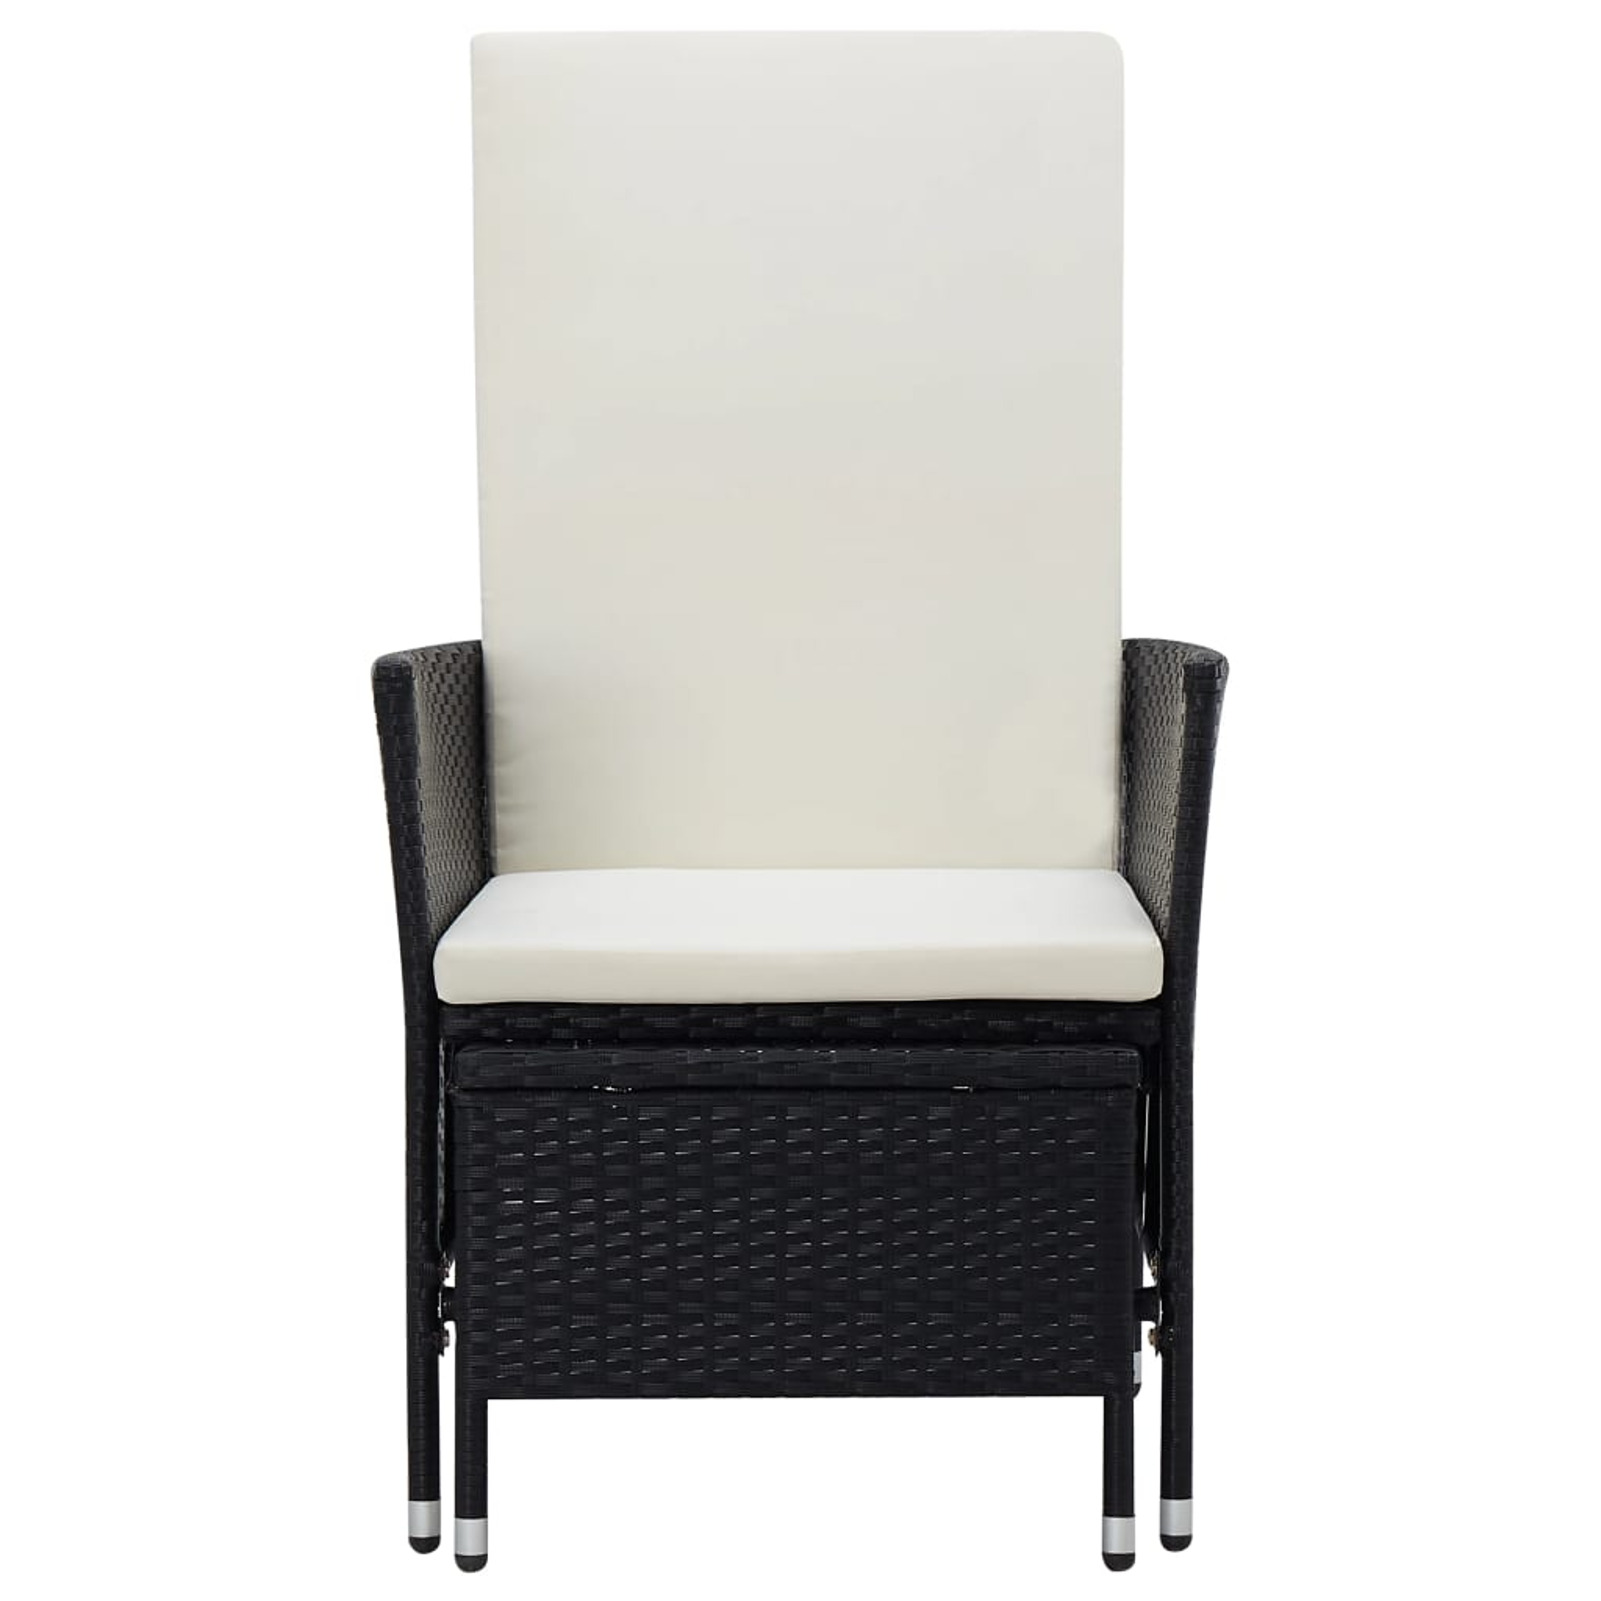 Reclining Patio Chair with Cushions Poly Rattan Black - image 3 of 7